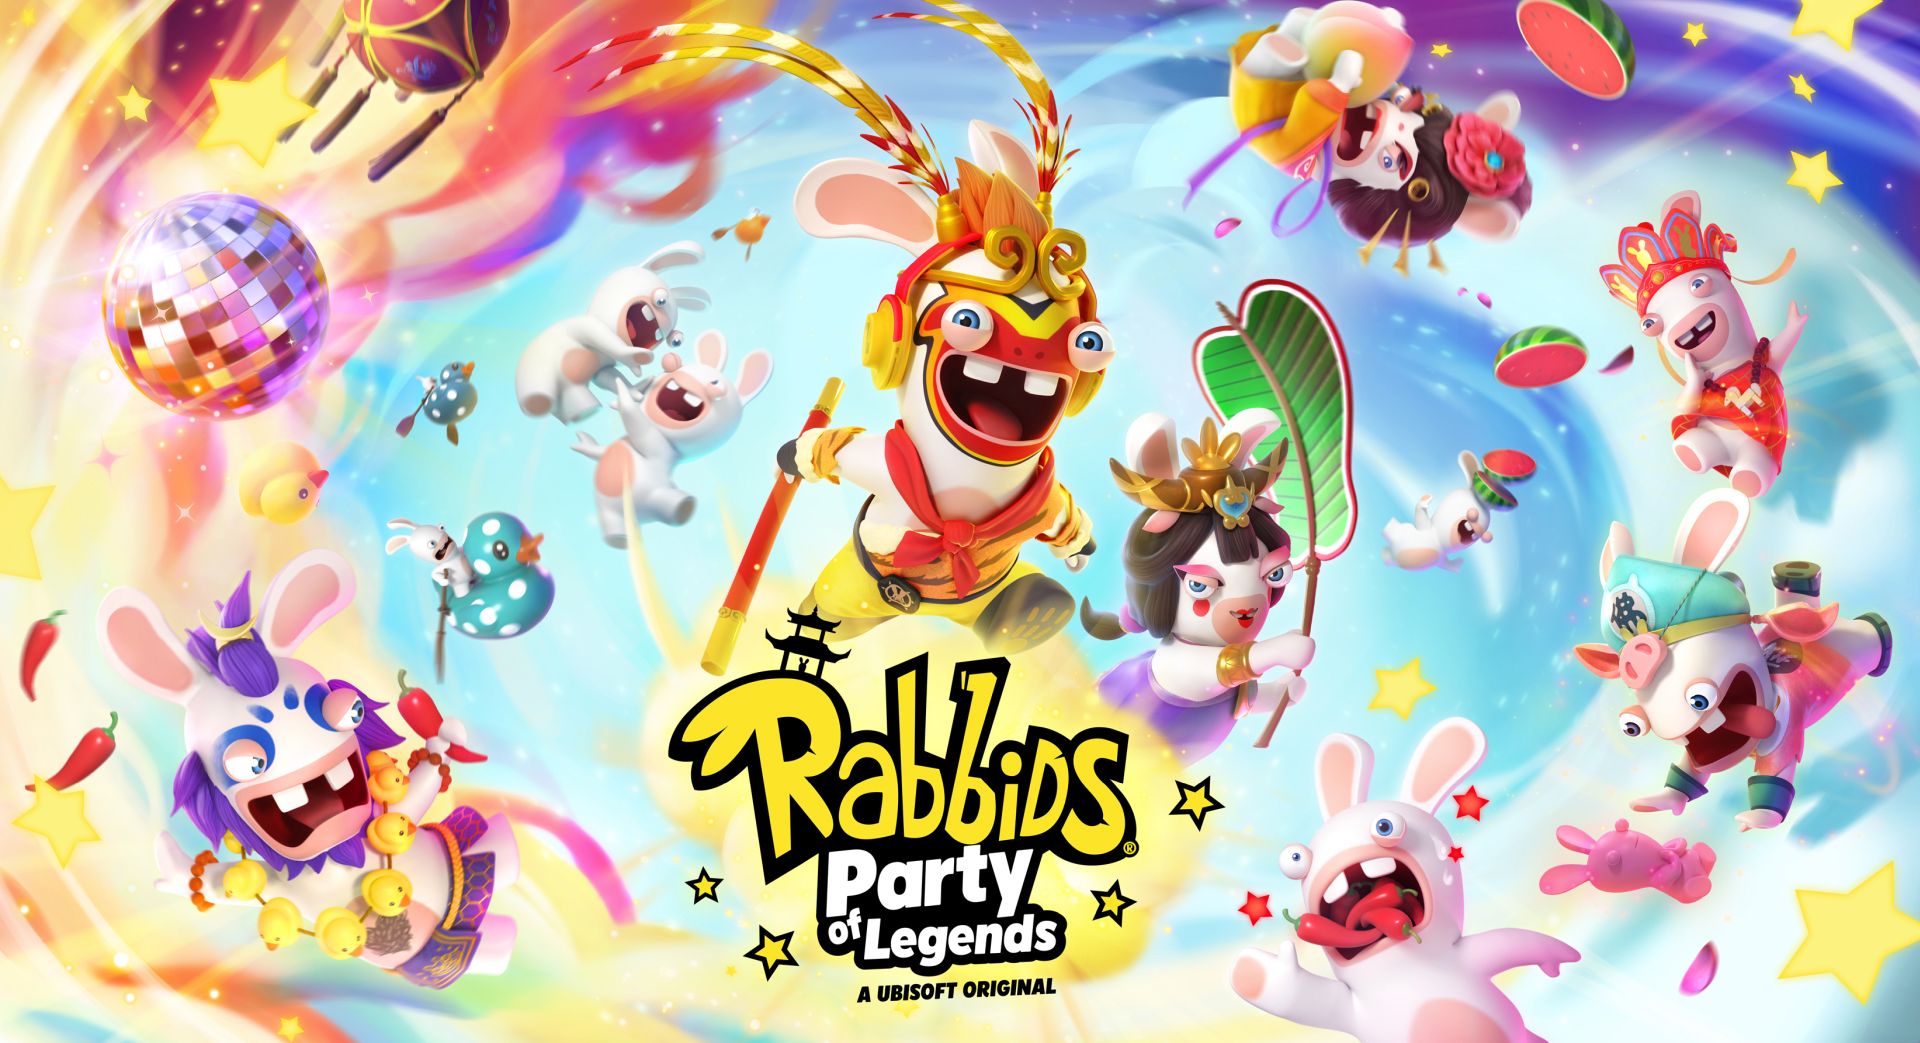 Go Wild With Rabbids: Party of Legends Today